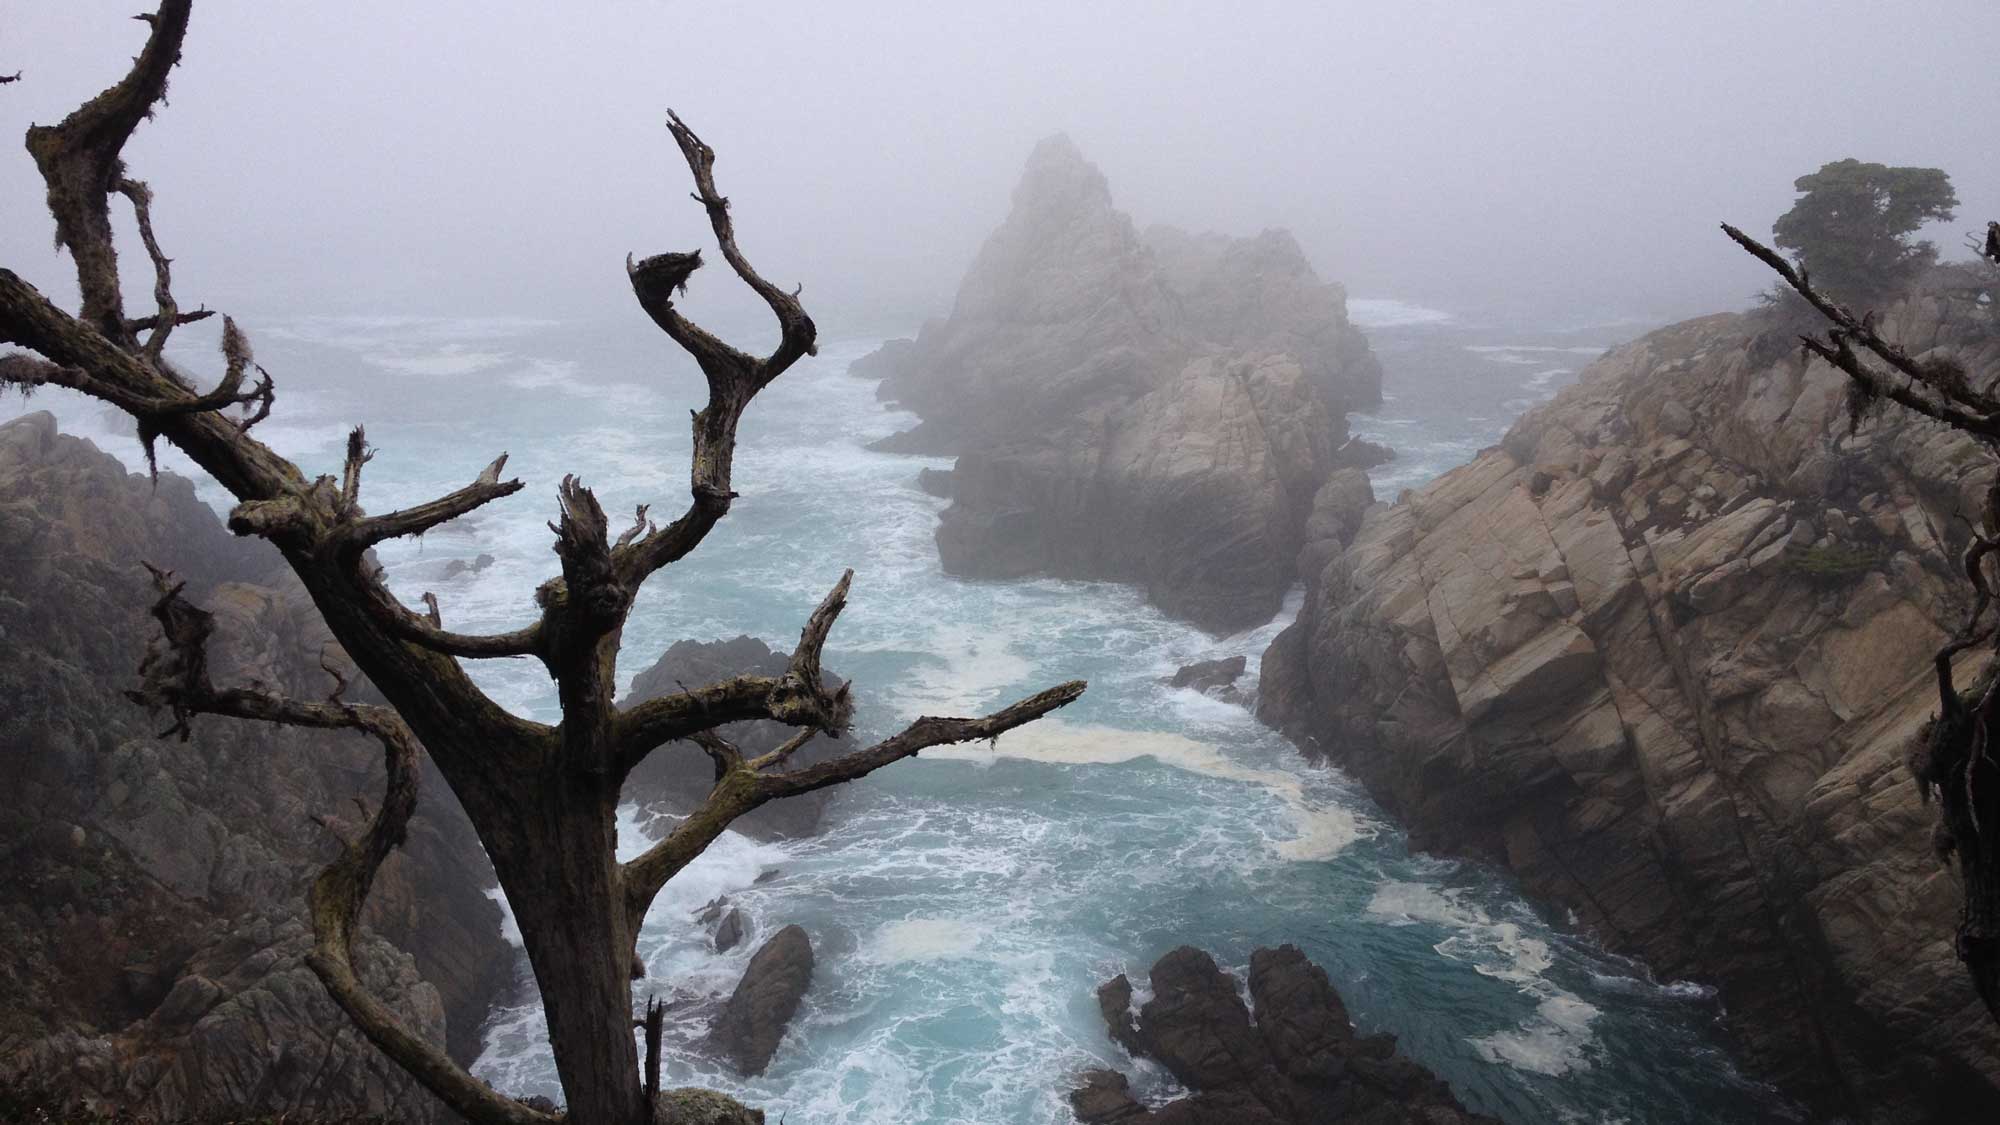 Photograph of the Pacific Ocean from Point Lobos State Natural Reserve in California.